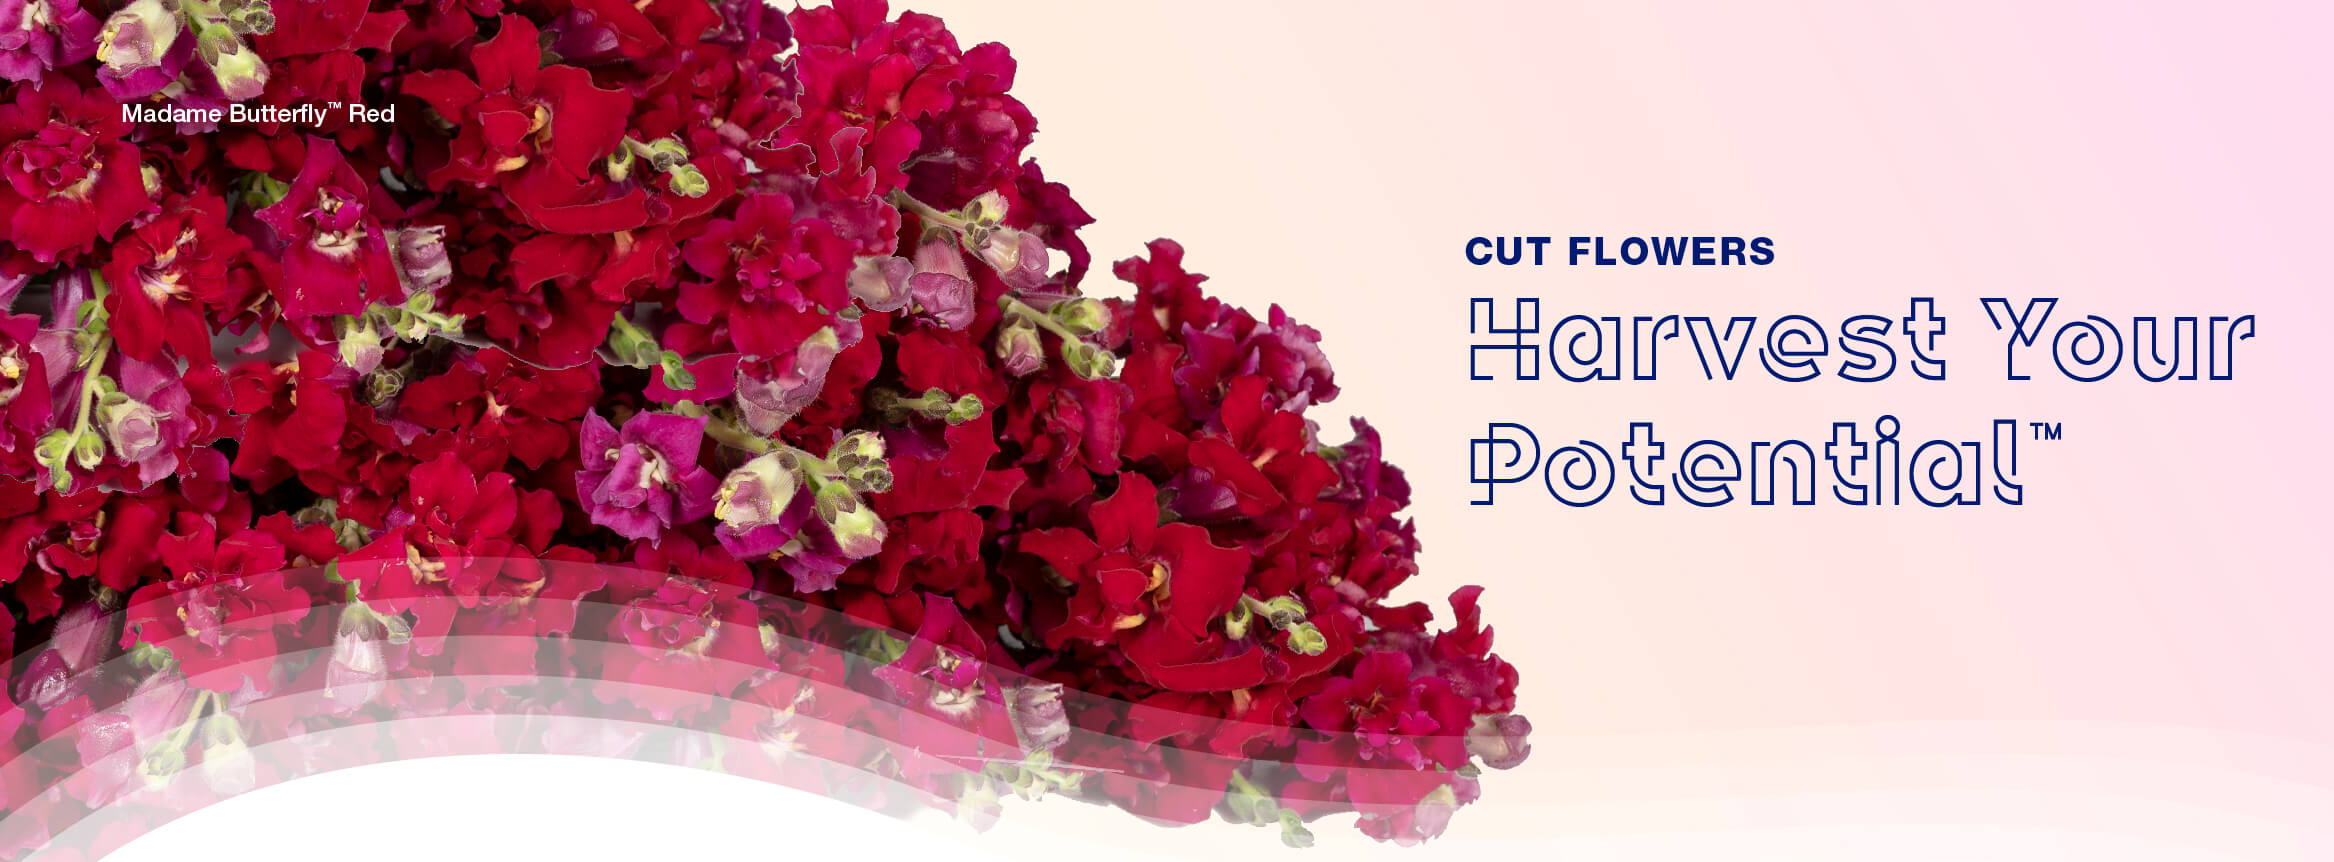 Harvest Your Potential with Syngenta Flowers Cut Flowers